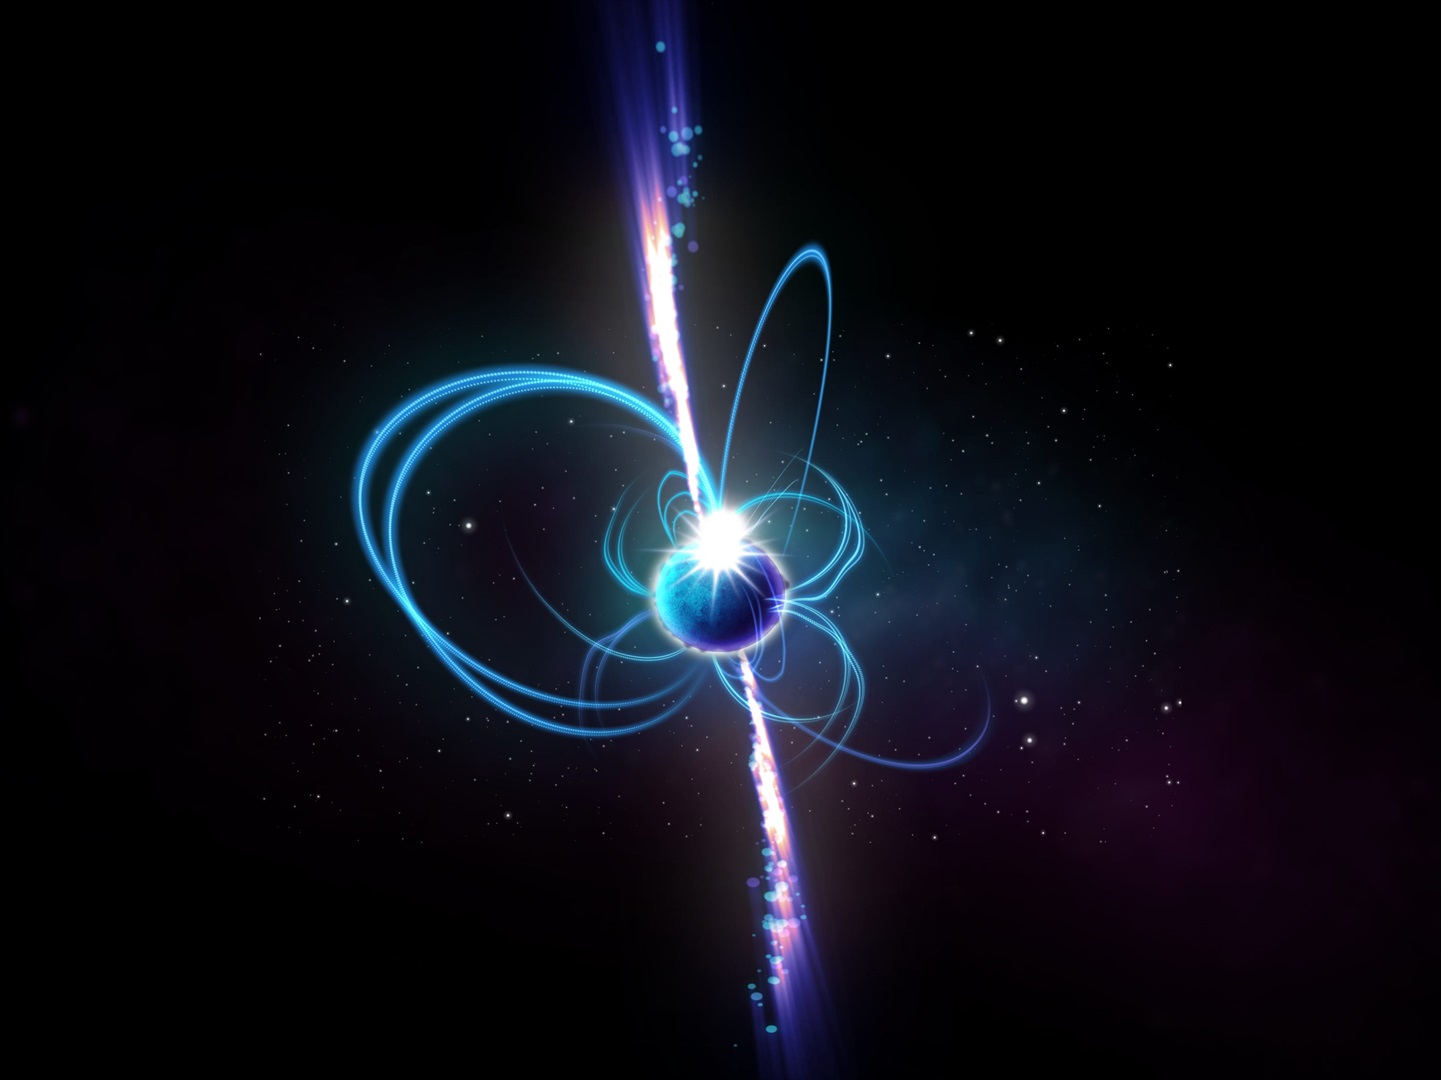 An artist’s impression of what the object might look like if it’s a magnetar, with powerful magnetic fields. ICRAR